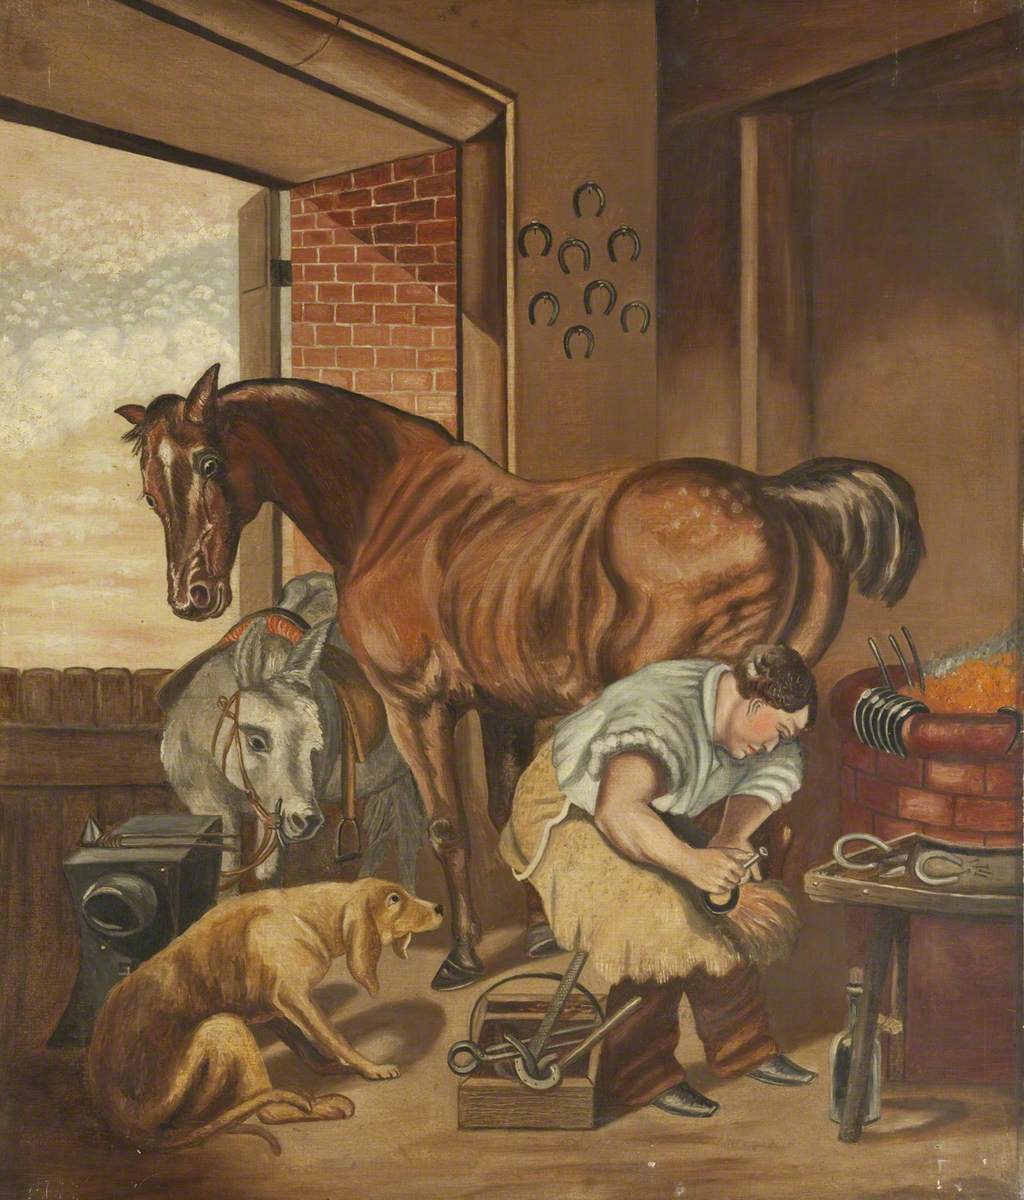 Today marks #NationalPetDay so we couldn’t resist marking the occasion by sharing this wonderful painting ‘Blacksmith at Work’ by Richard Holmes showing a blacksmith at work surrounded by animals. 🐶🐎 What pets do you have? 🐩 Let us know in the comments below 🐎